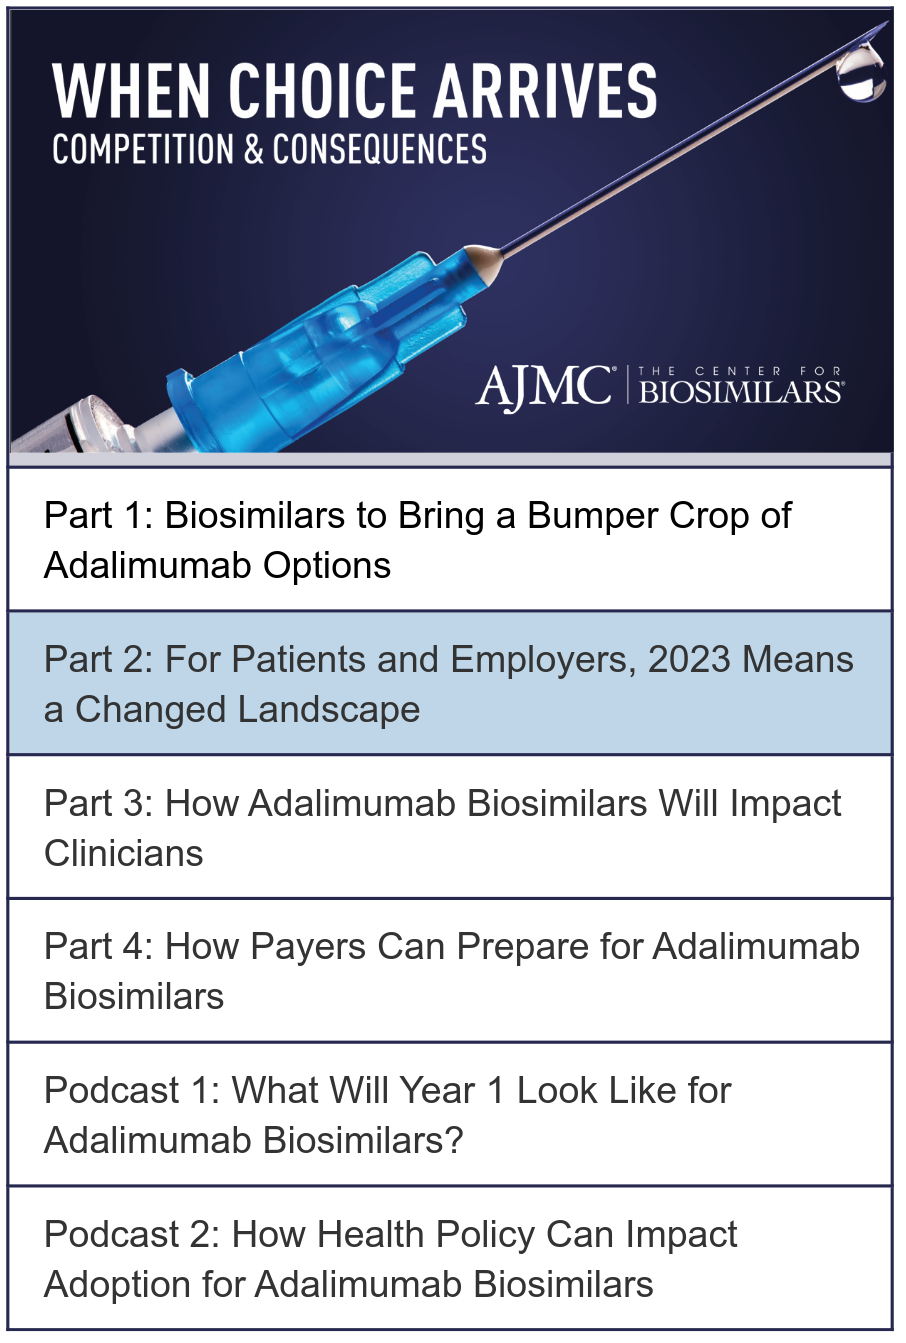 "When Choice Arrives: Competition & Consequences" written over a bright blue syringe with the AJMC/The Center for Biosimilars logo in the bottom right corner. Under the image is a list of 6 items (4 article titles and 2 podcasts). The second article item is highlighted.